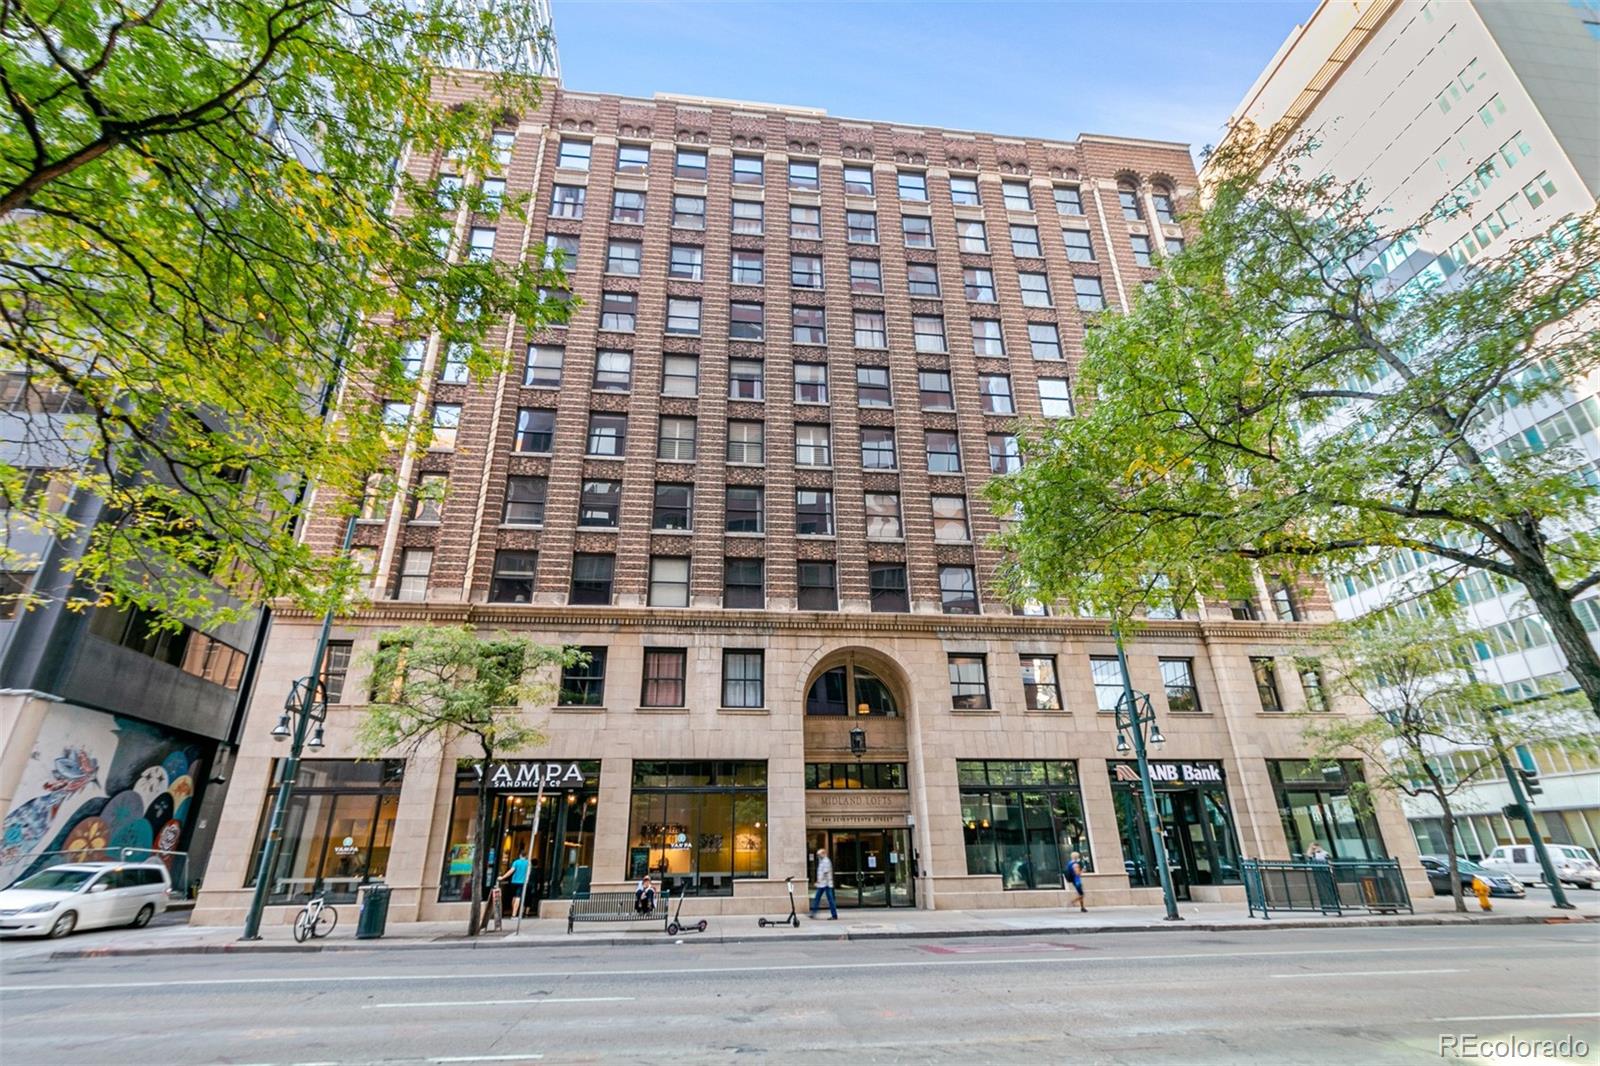 Historic Charm in the heart of Downtown Denver